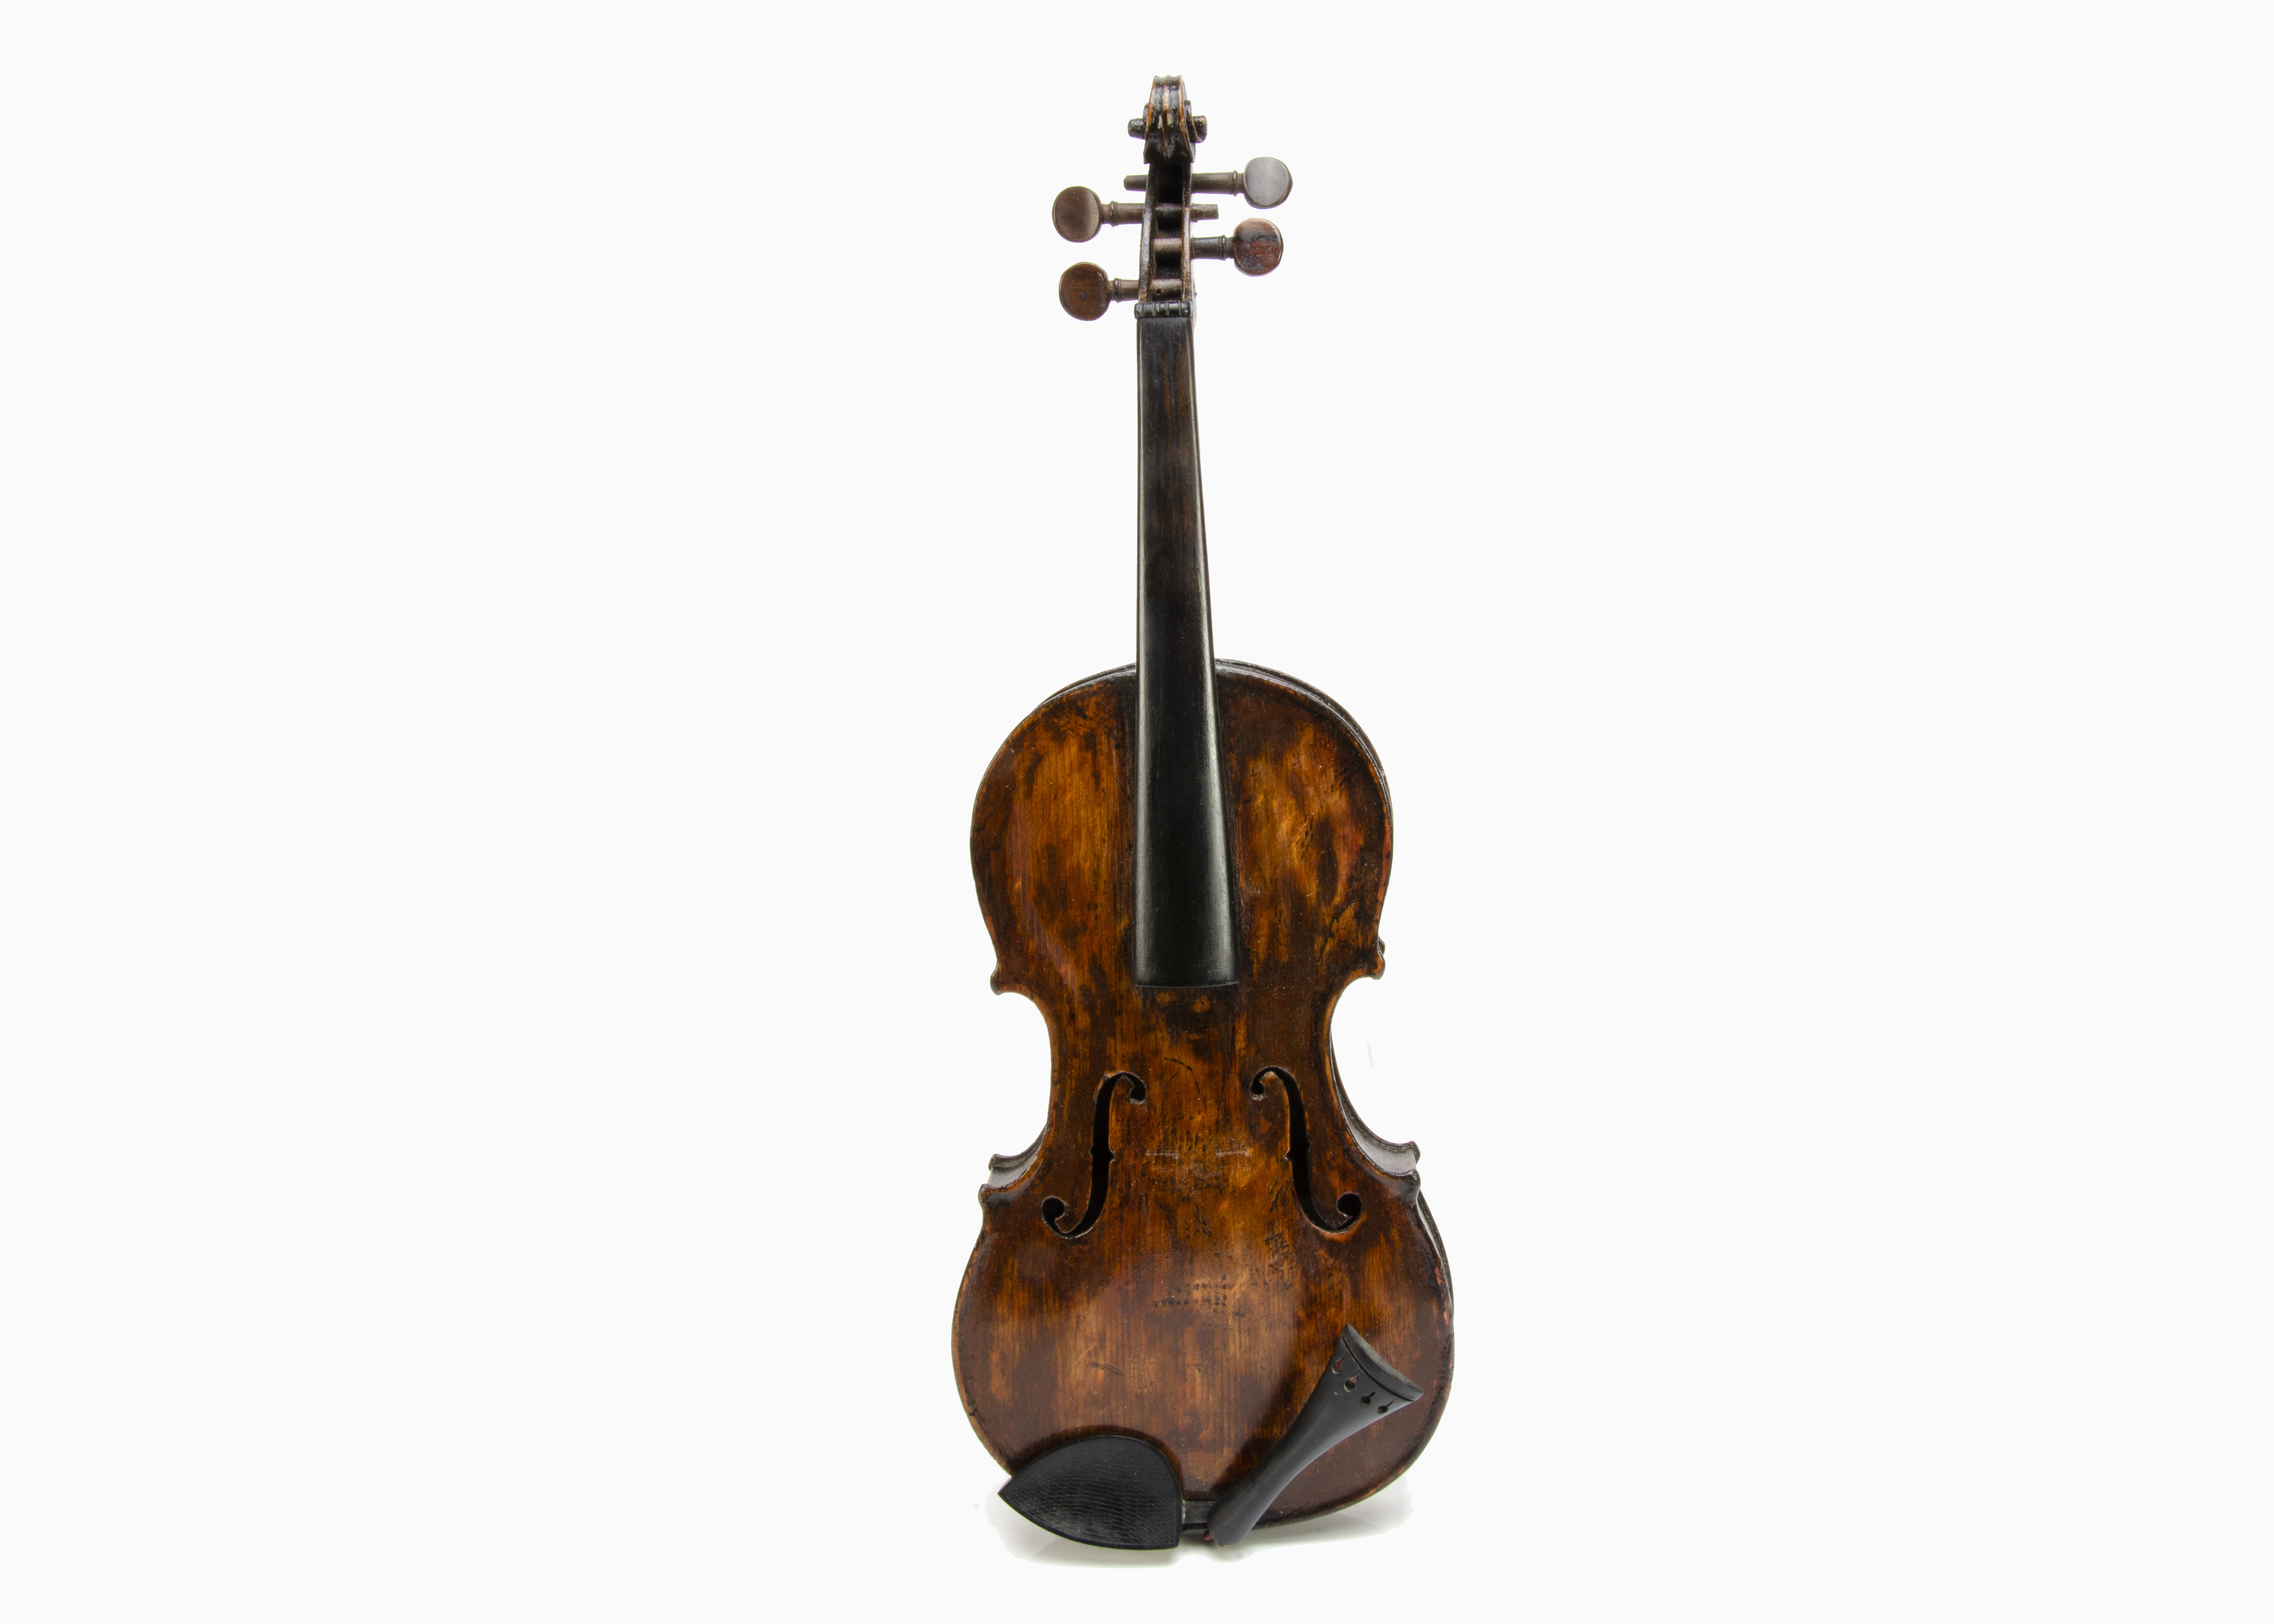 Violin, an unmarked full size violin, highly re-varnished with no strings or bridge - with bow (